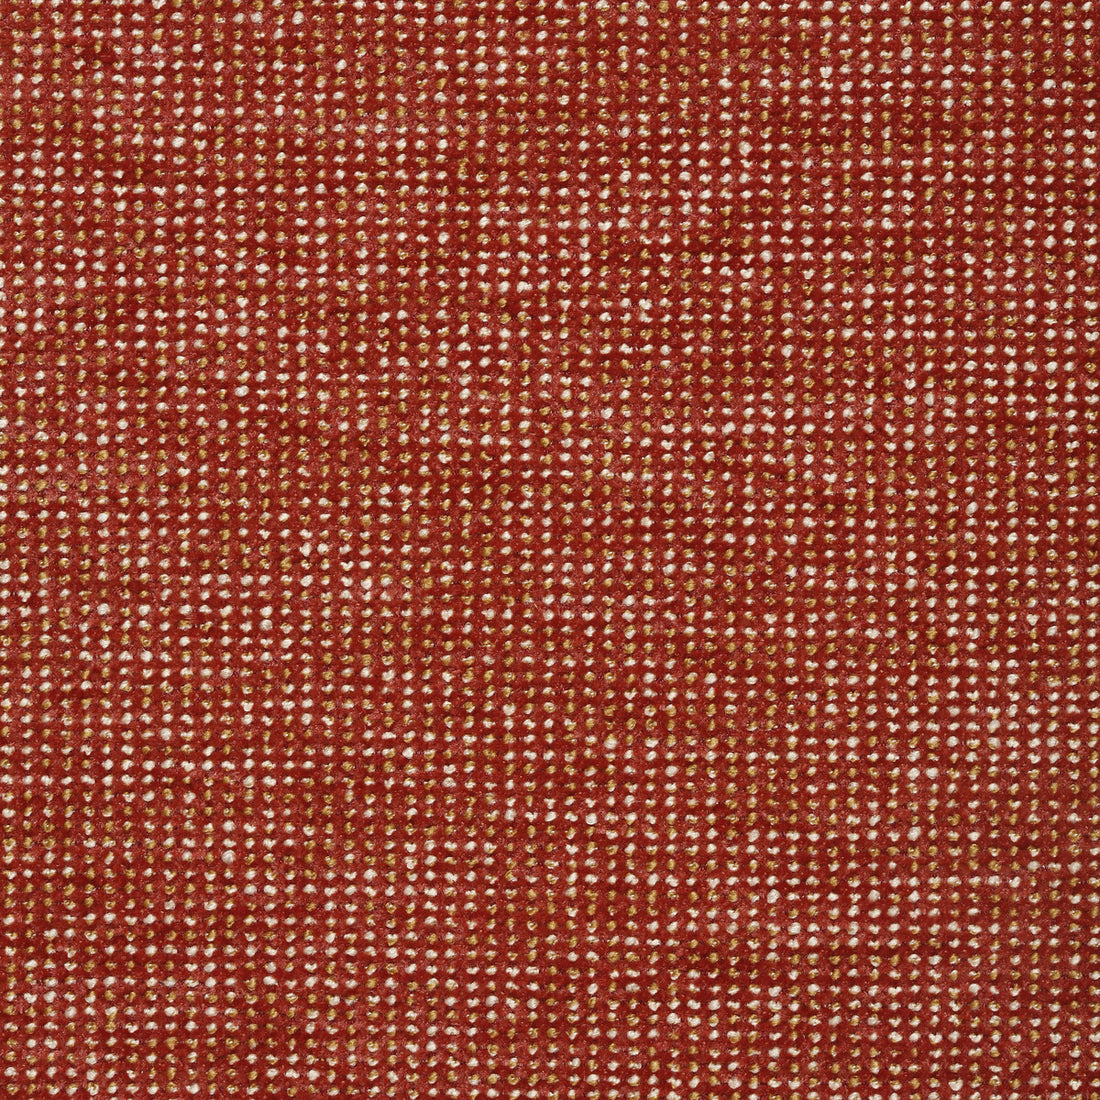 Kravet Smart fabric in 35115-24 color - pattern 35115.24.0 - by Kravet Smart in the Crypton Home collection